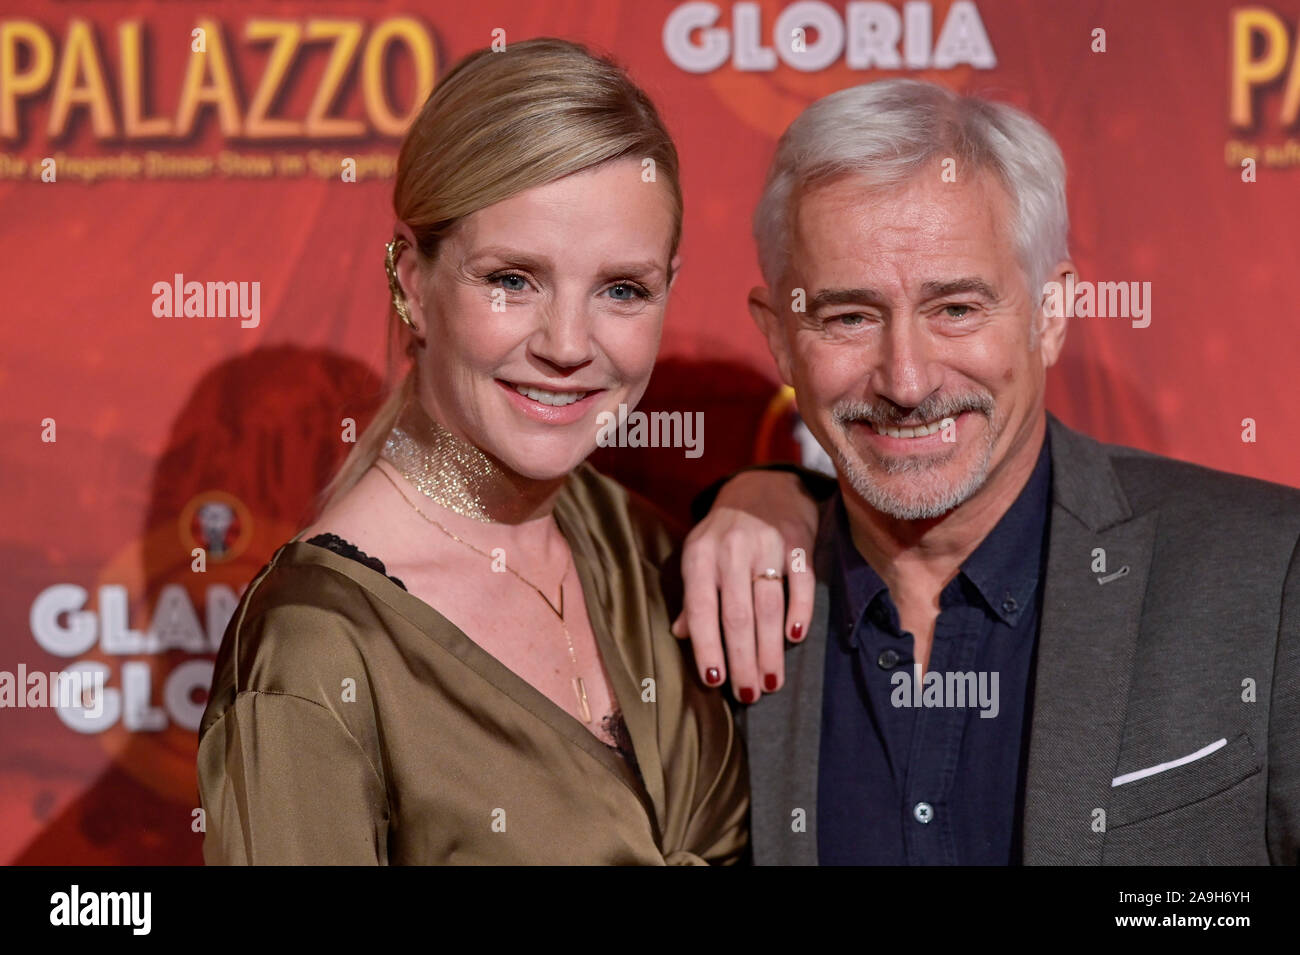 Hamburg, Germany. 15th Nov, 2019. Gerry Hungbauer, actor, and Kim-Sarah Brandts, actress, appear at the premiere of the new Palazzo show 'Glanz & Gloria' in the tent in front of the Deichtorhallen on the red carpet. The dinner show in the 'Spiegelpalast' is one of five 'Palazzo' dinner shows in Germany where well-known chefs will be the hosts. Credit: Axel Heimken/dpa/Alamy Live News Stock Photo